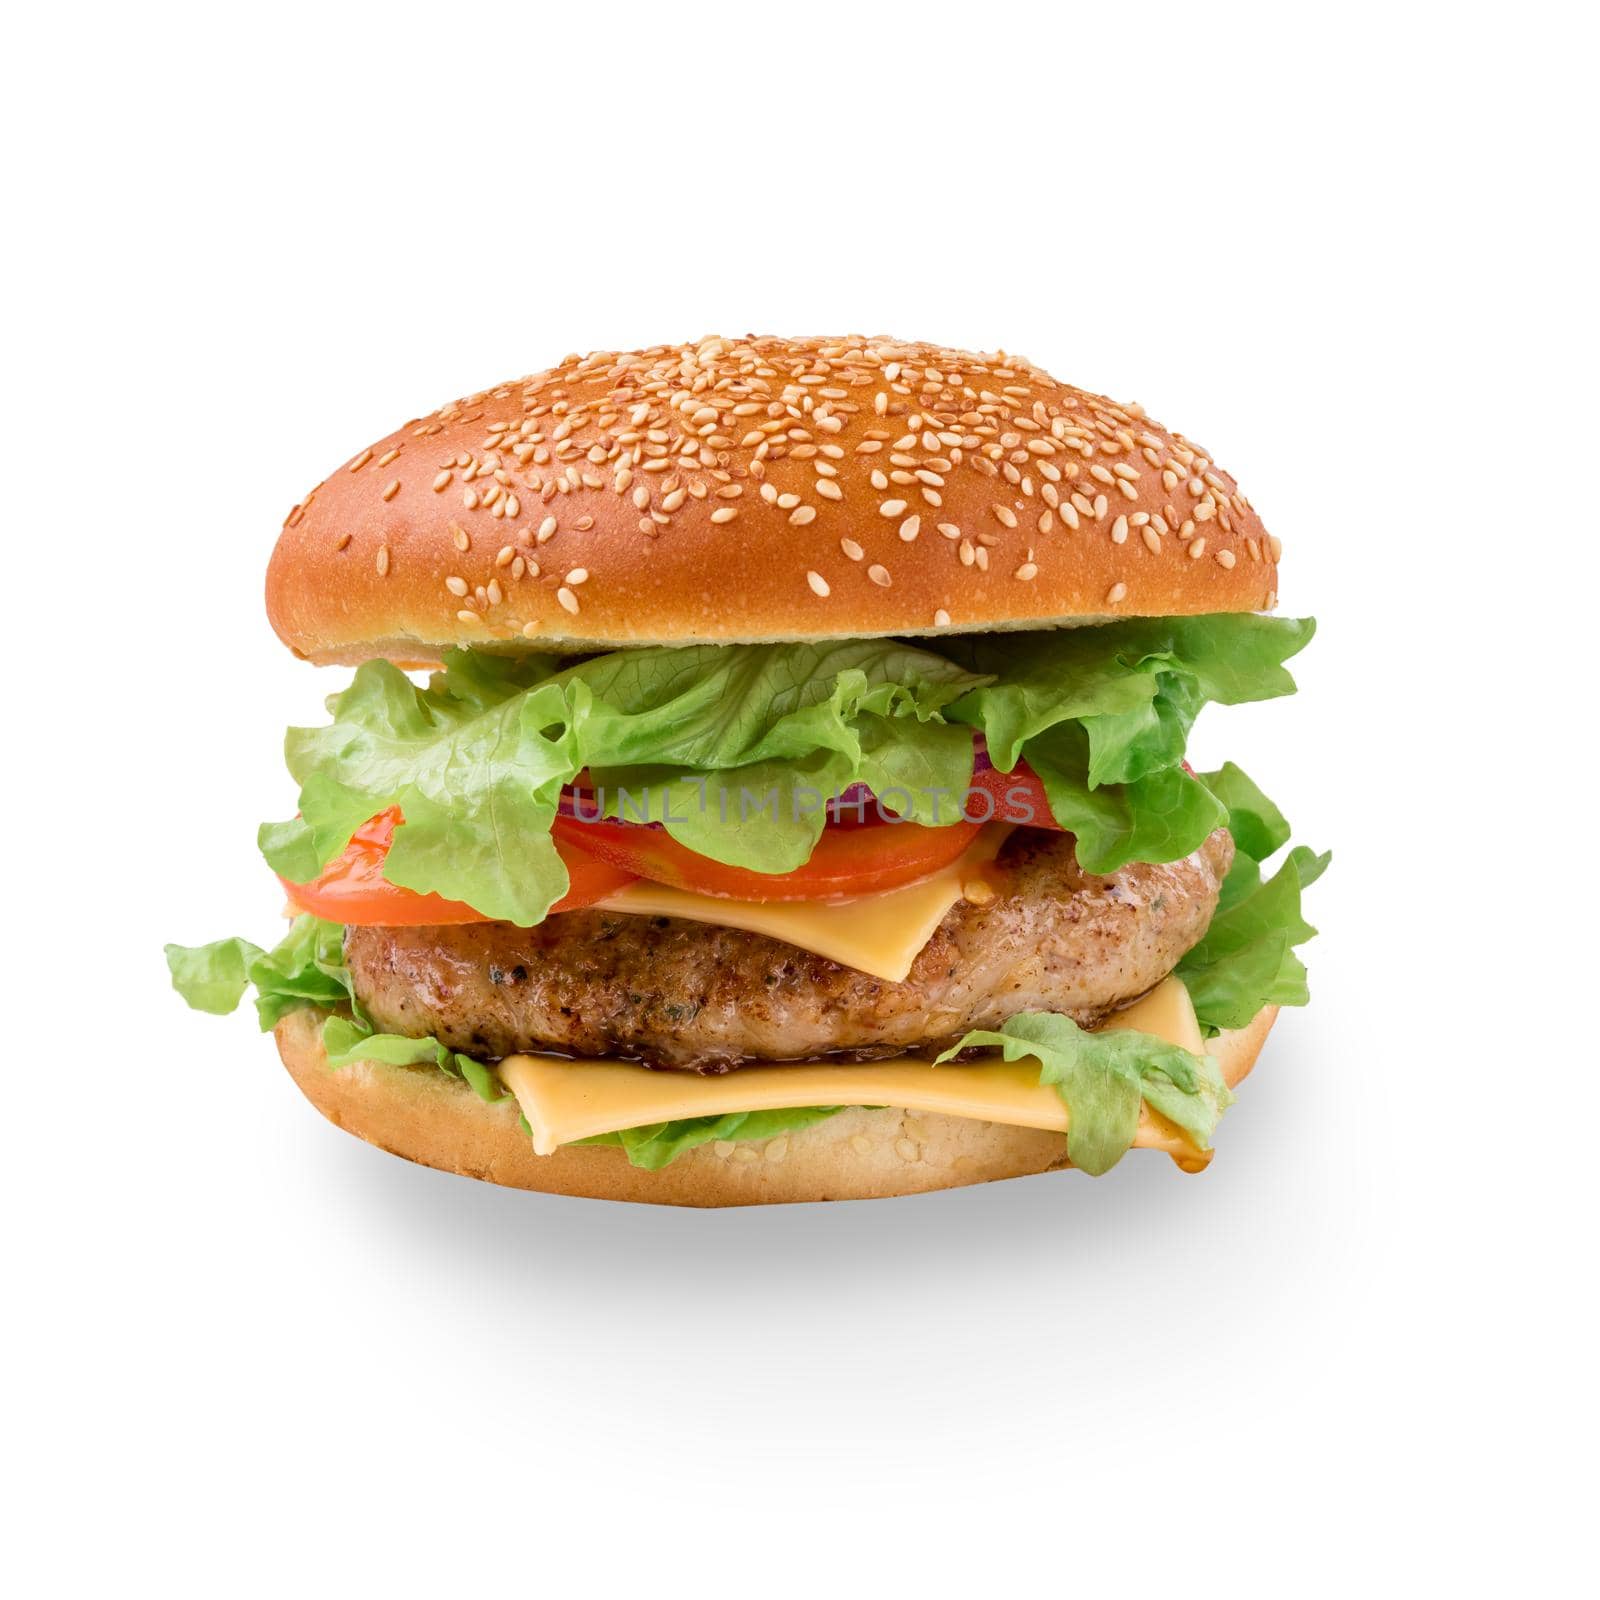 Tasty hamburger on white background. Copy space to place text, close up